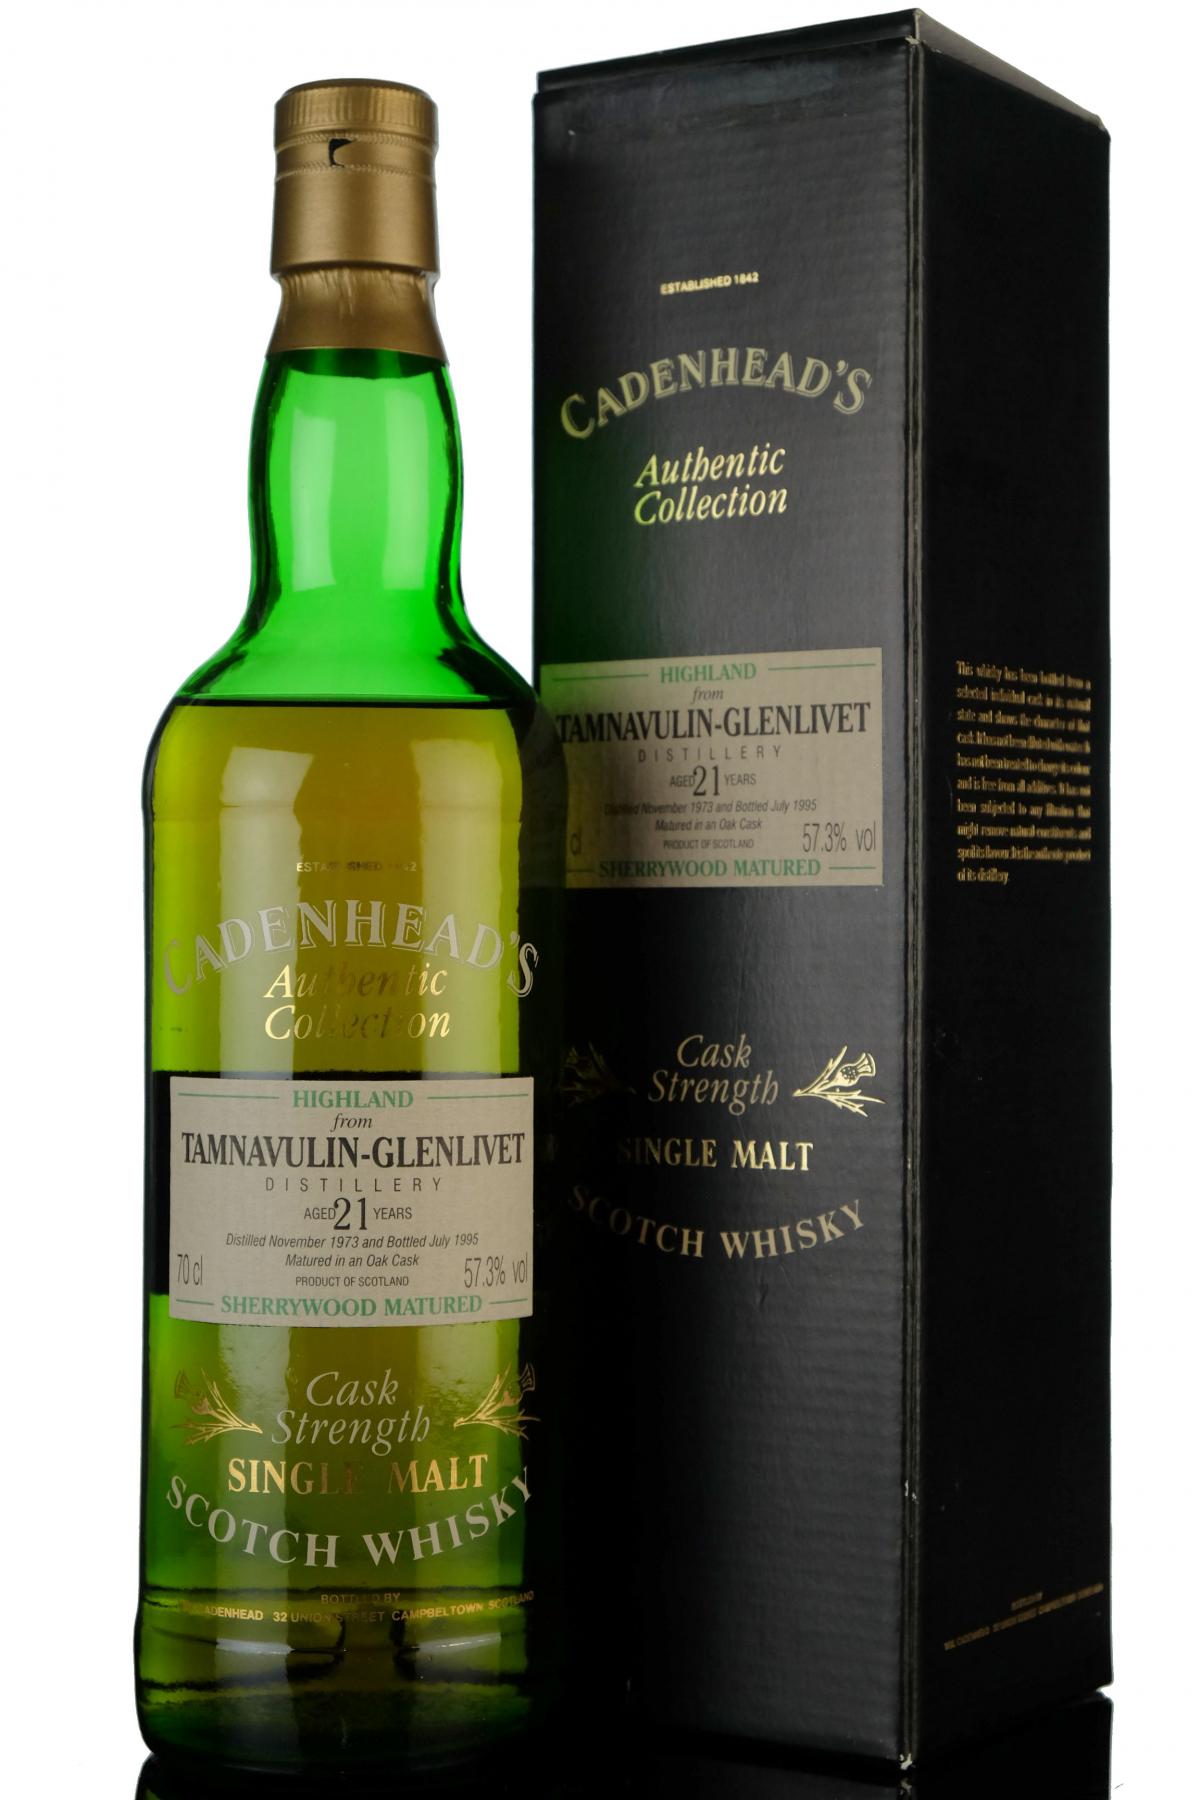 Tamnavulin-Glenlivet 1973-1995 - 21 Year Old - Cadenheads Authentic Collection